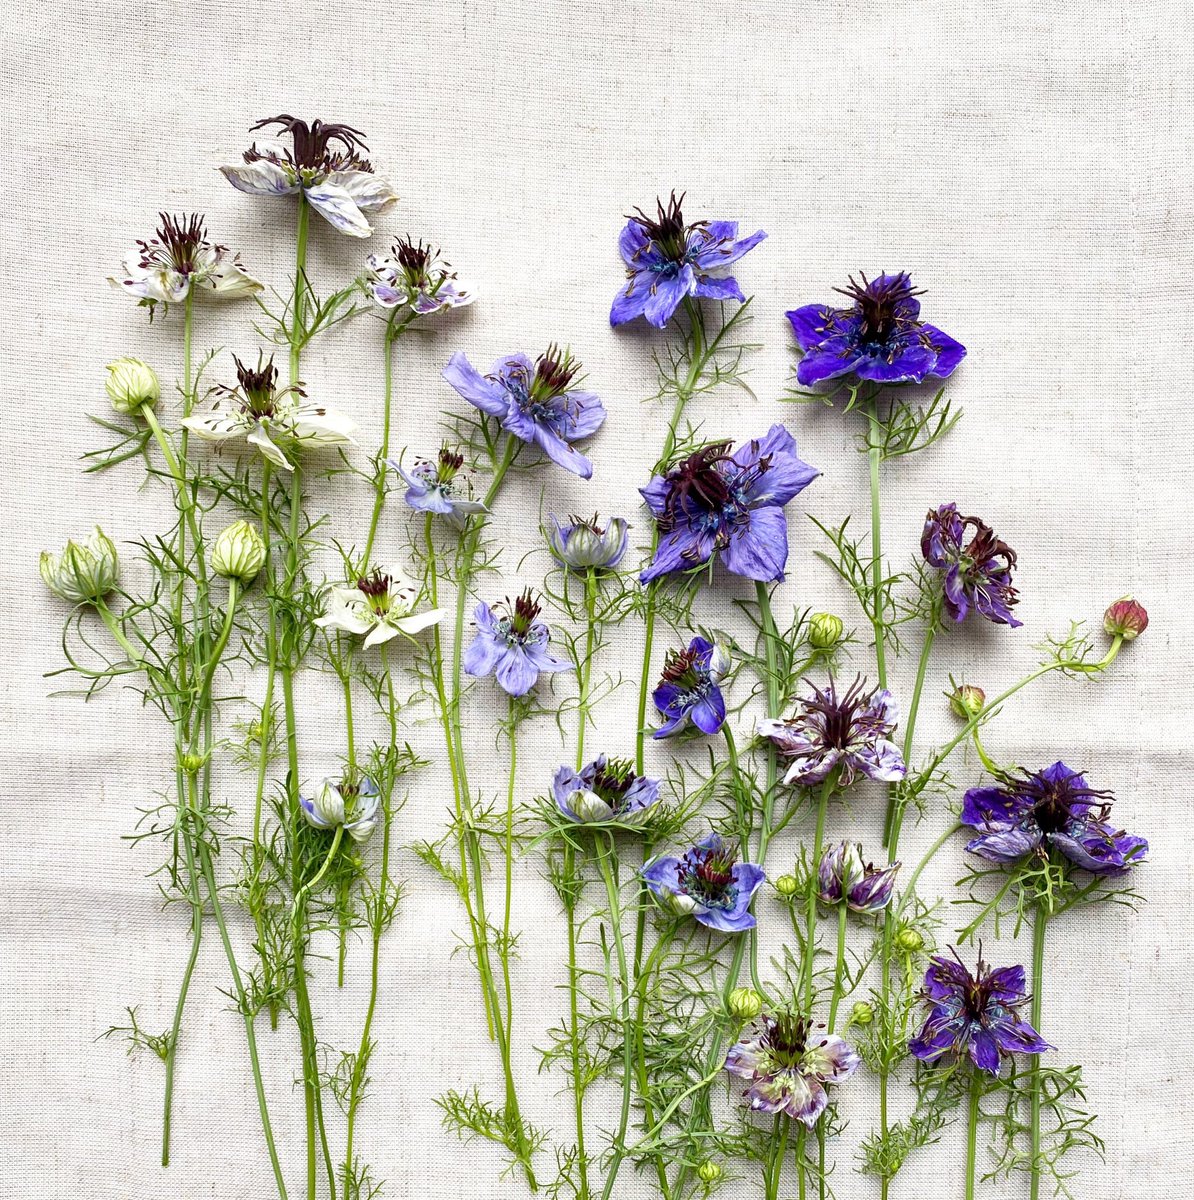 Just found some recent academic papers showing that looking at images of individual plants and flowers alleviates stress, triggers relaxation and speeds up recovery from illness. I KNEW IT. Here, have some of my medicinal photographs x